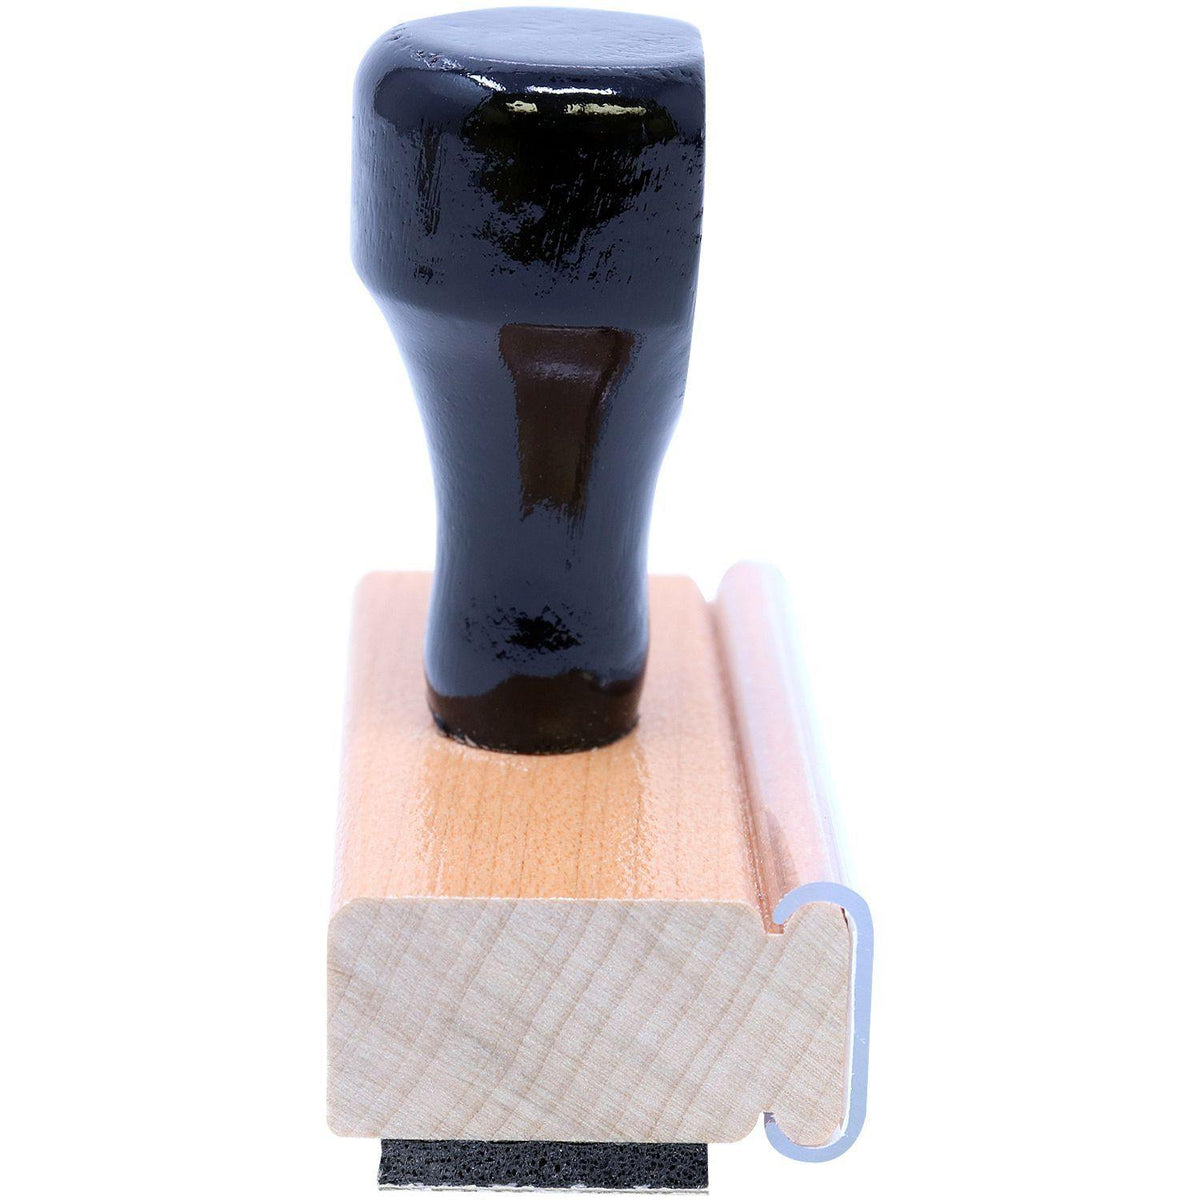 Side View of Deposition Exhibit Rubber Stamp Alt 1